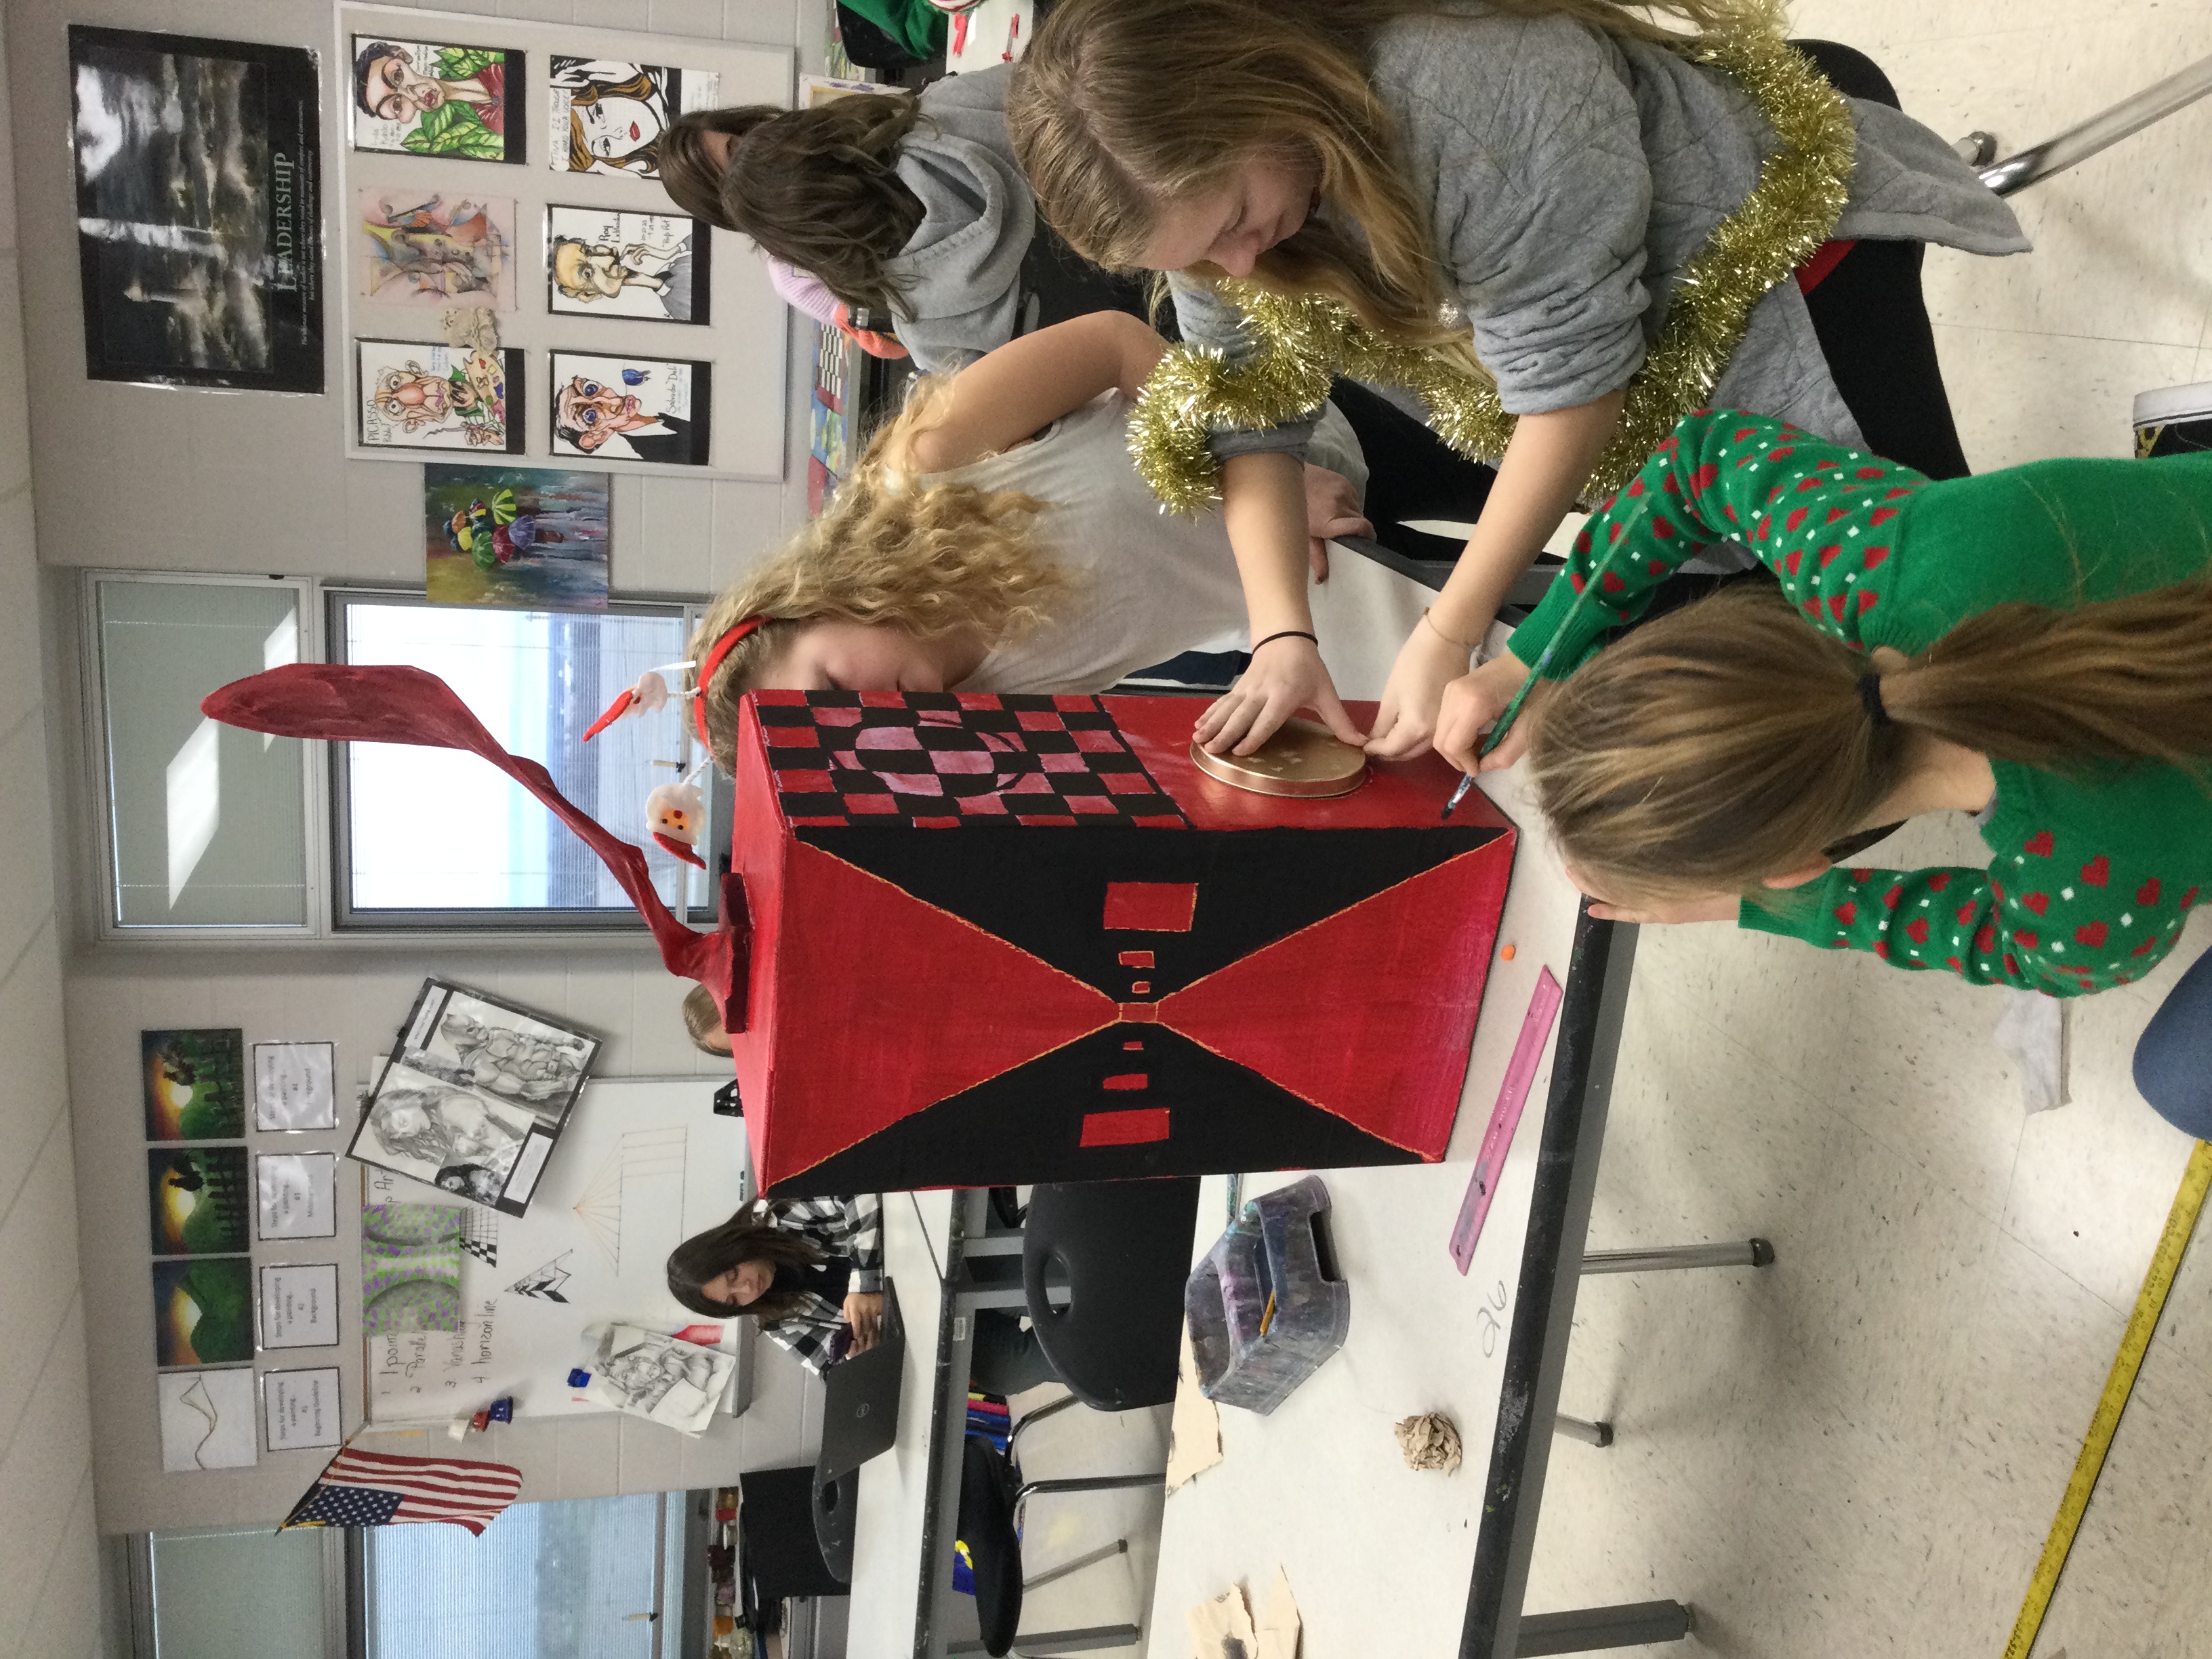 Creativity abounds in art club when students create the Reindeer Games Trophies.